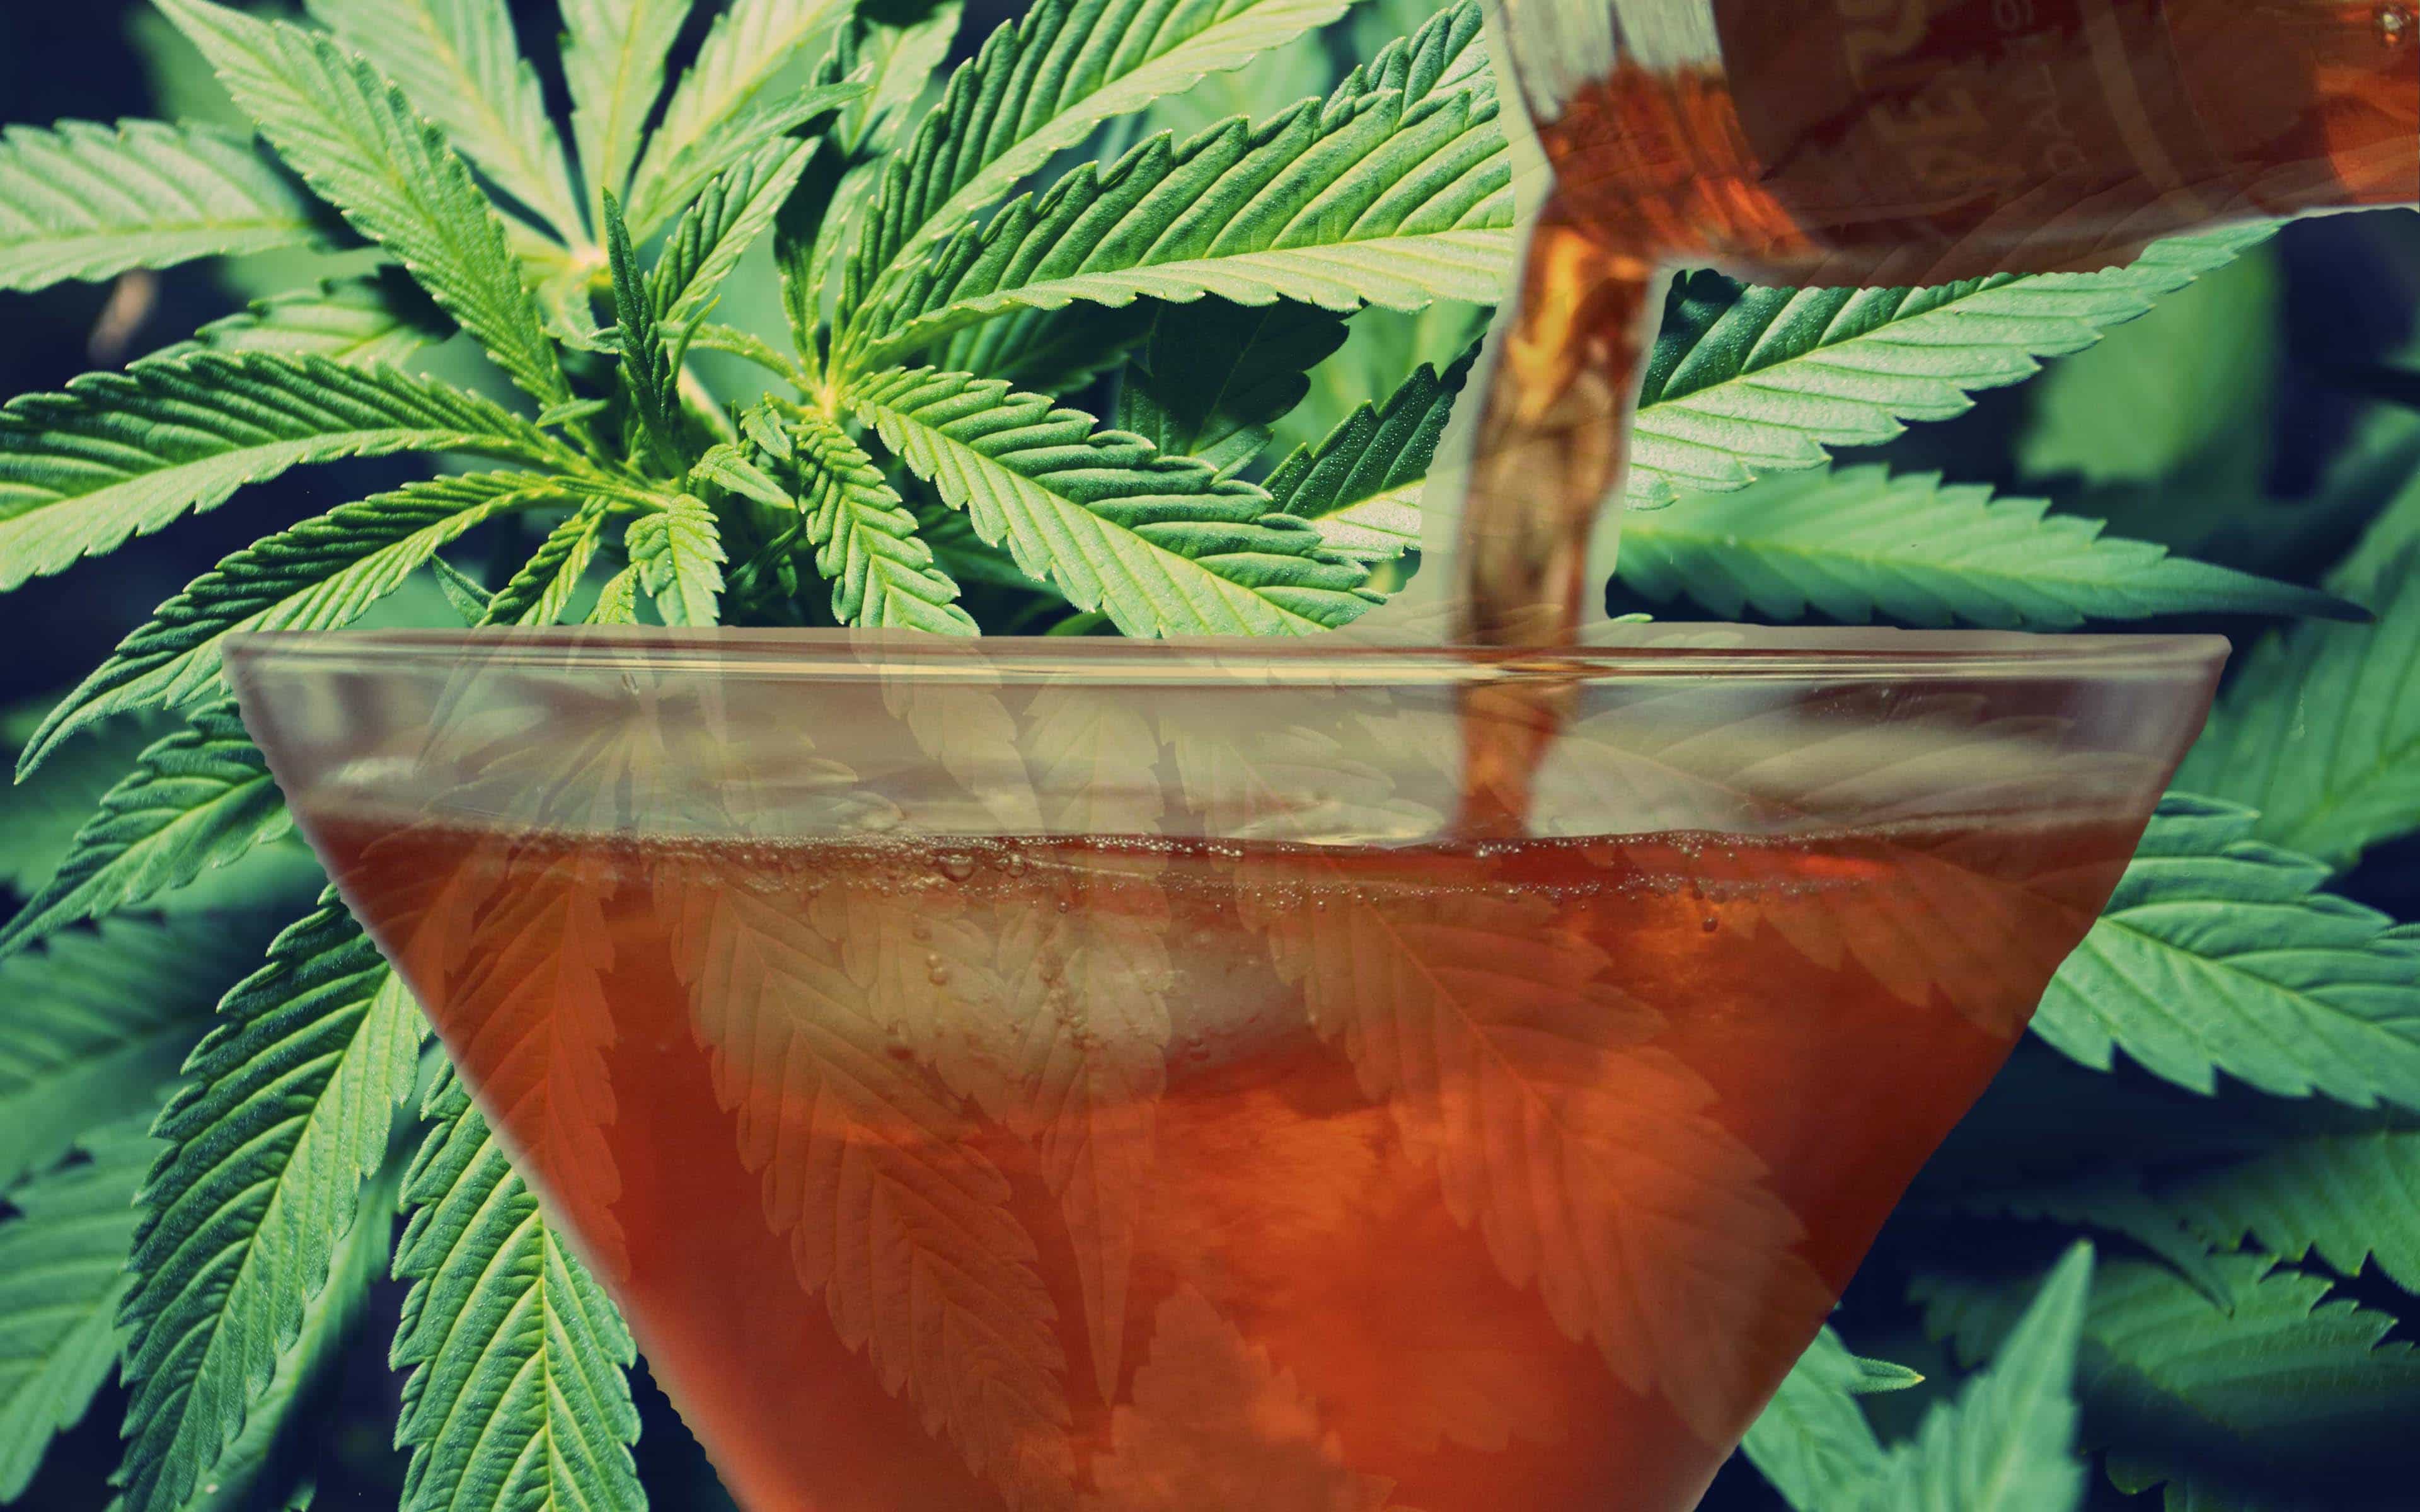 Rising Need For Wellness Drinks To Drive The Global Cannabis-Based Alcoholic Beverages Market Growth